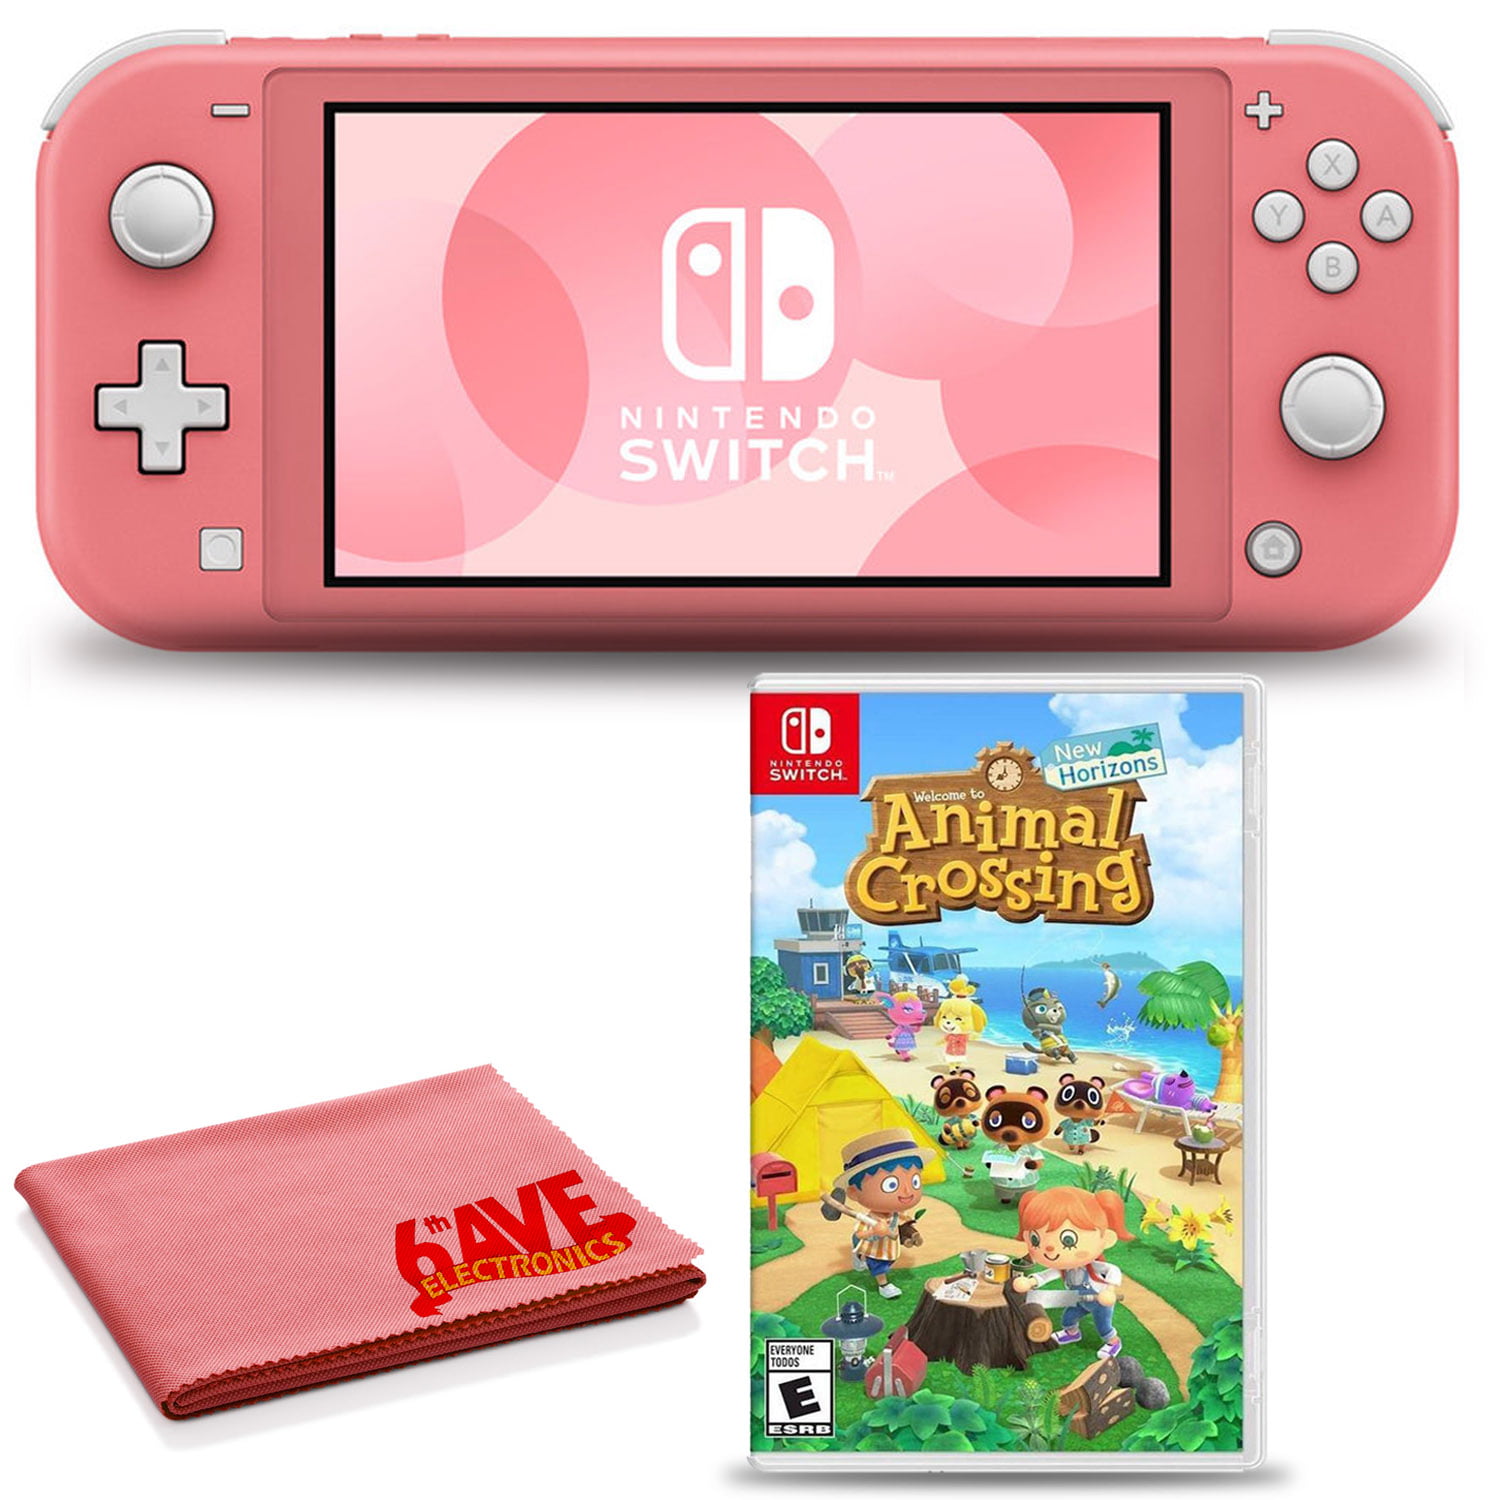 How to Install and Play Roblox on Nintendo Switch Lite?